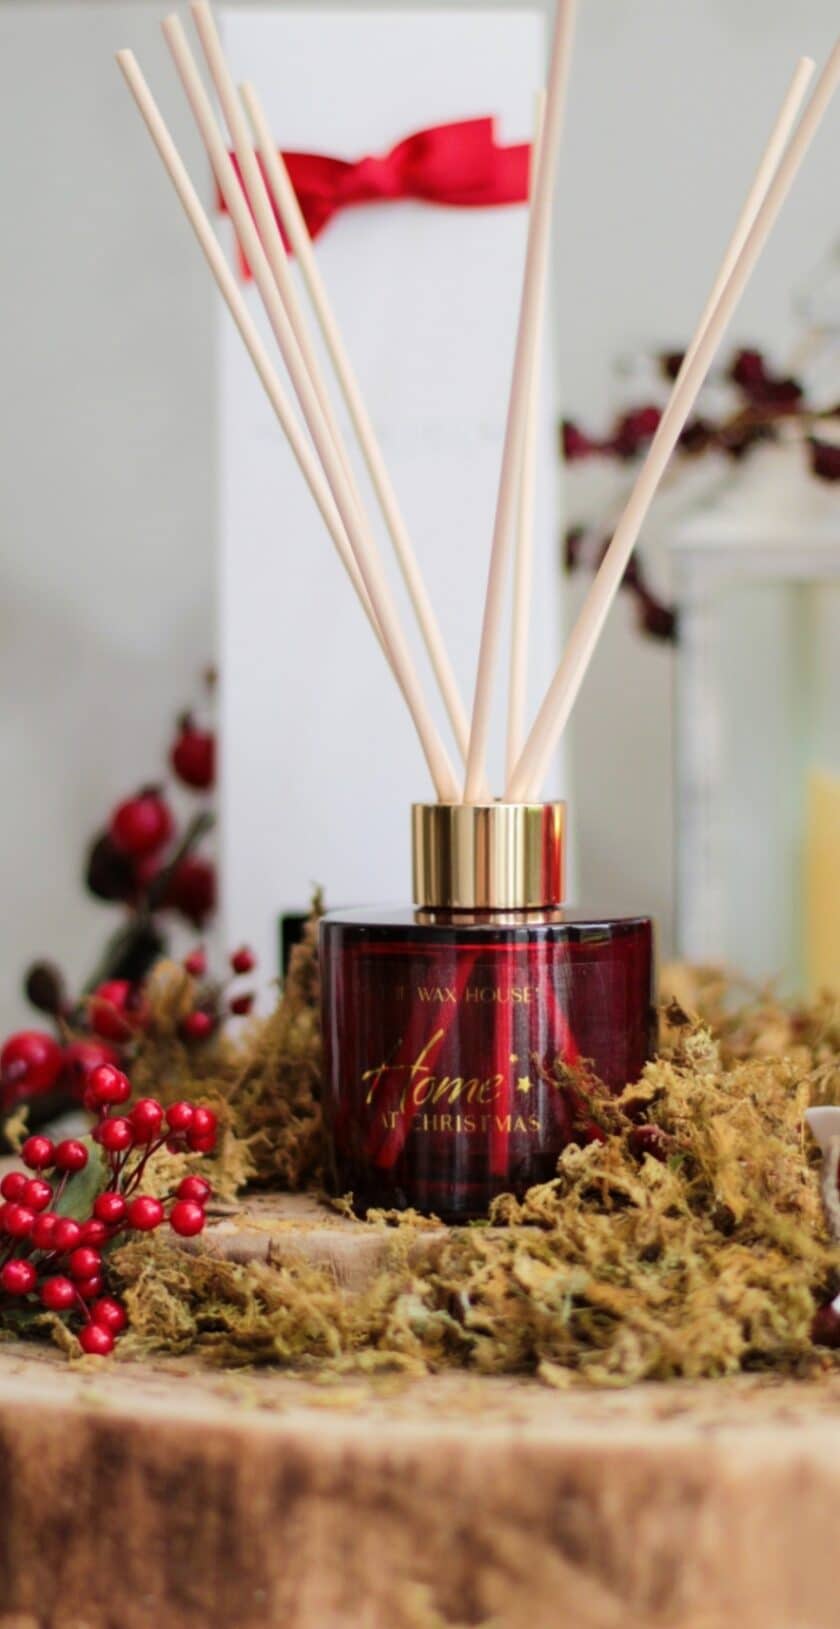 Home at Christmas Luxury Reed Diffuser in Ruby Red and Natural Reeds